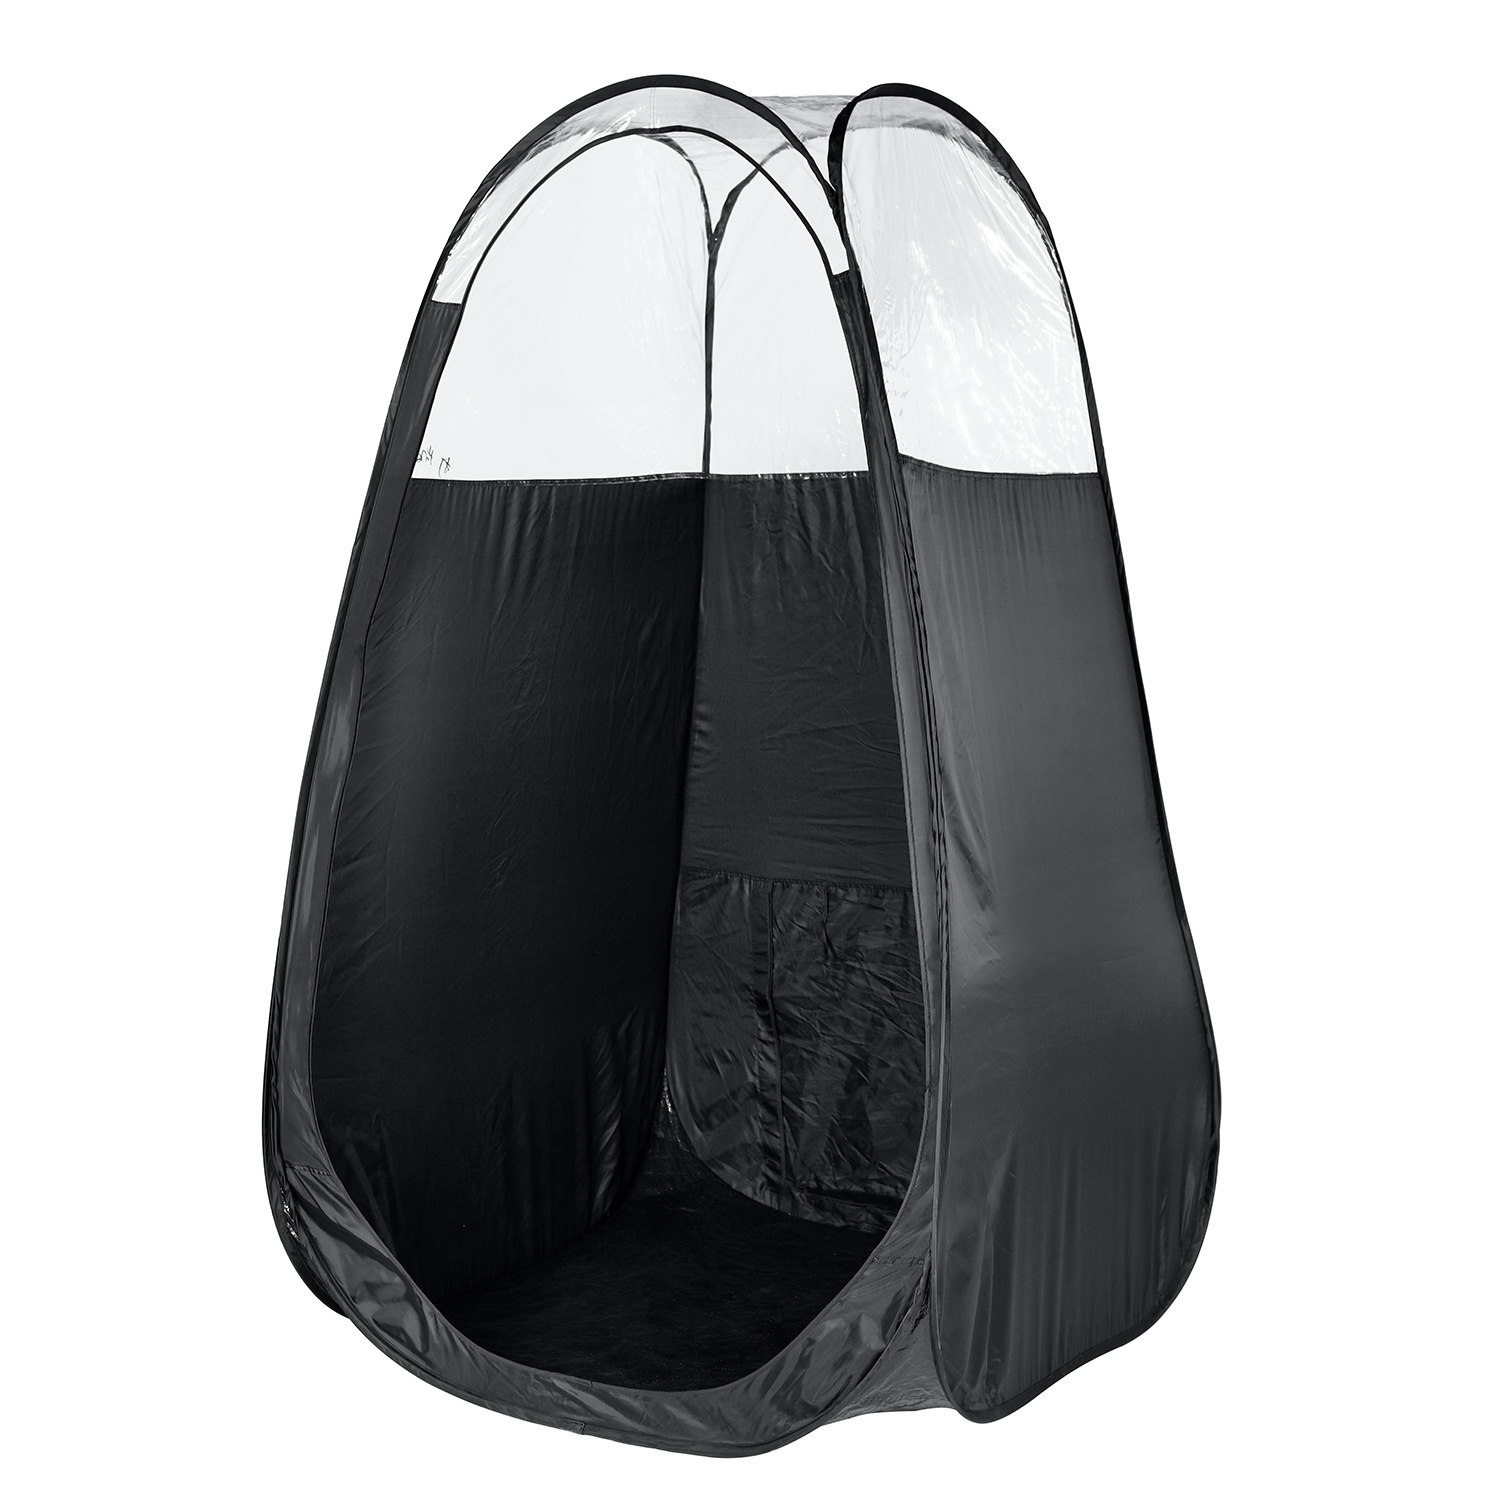 Hottest Black Colour Spray Tanning Tents